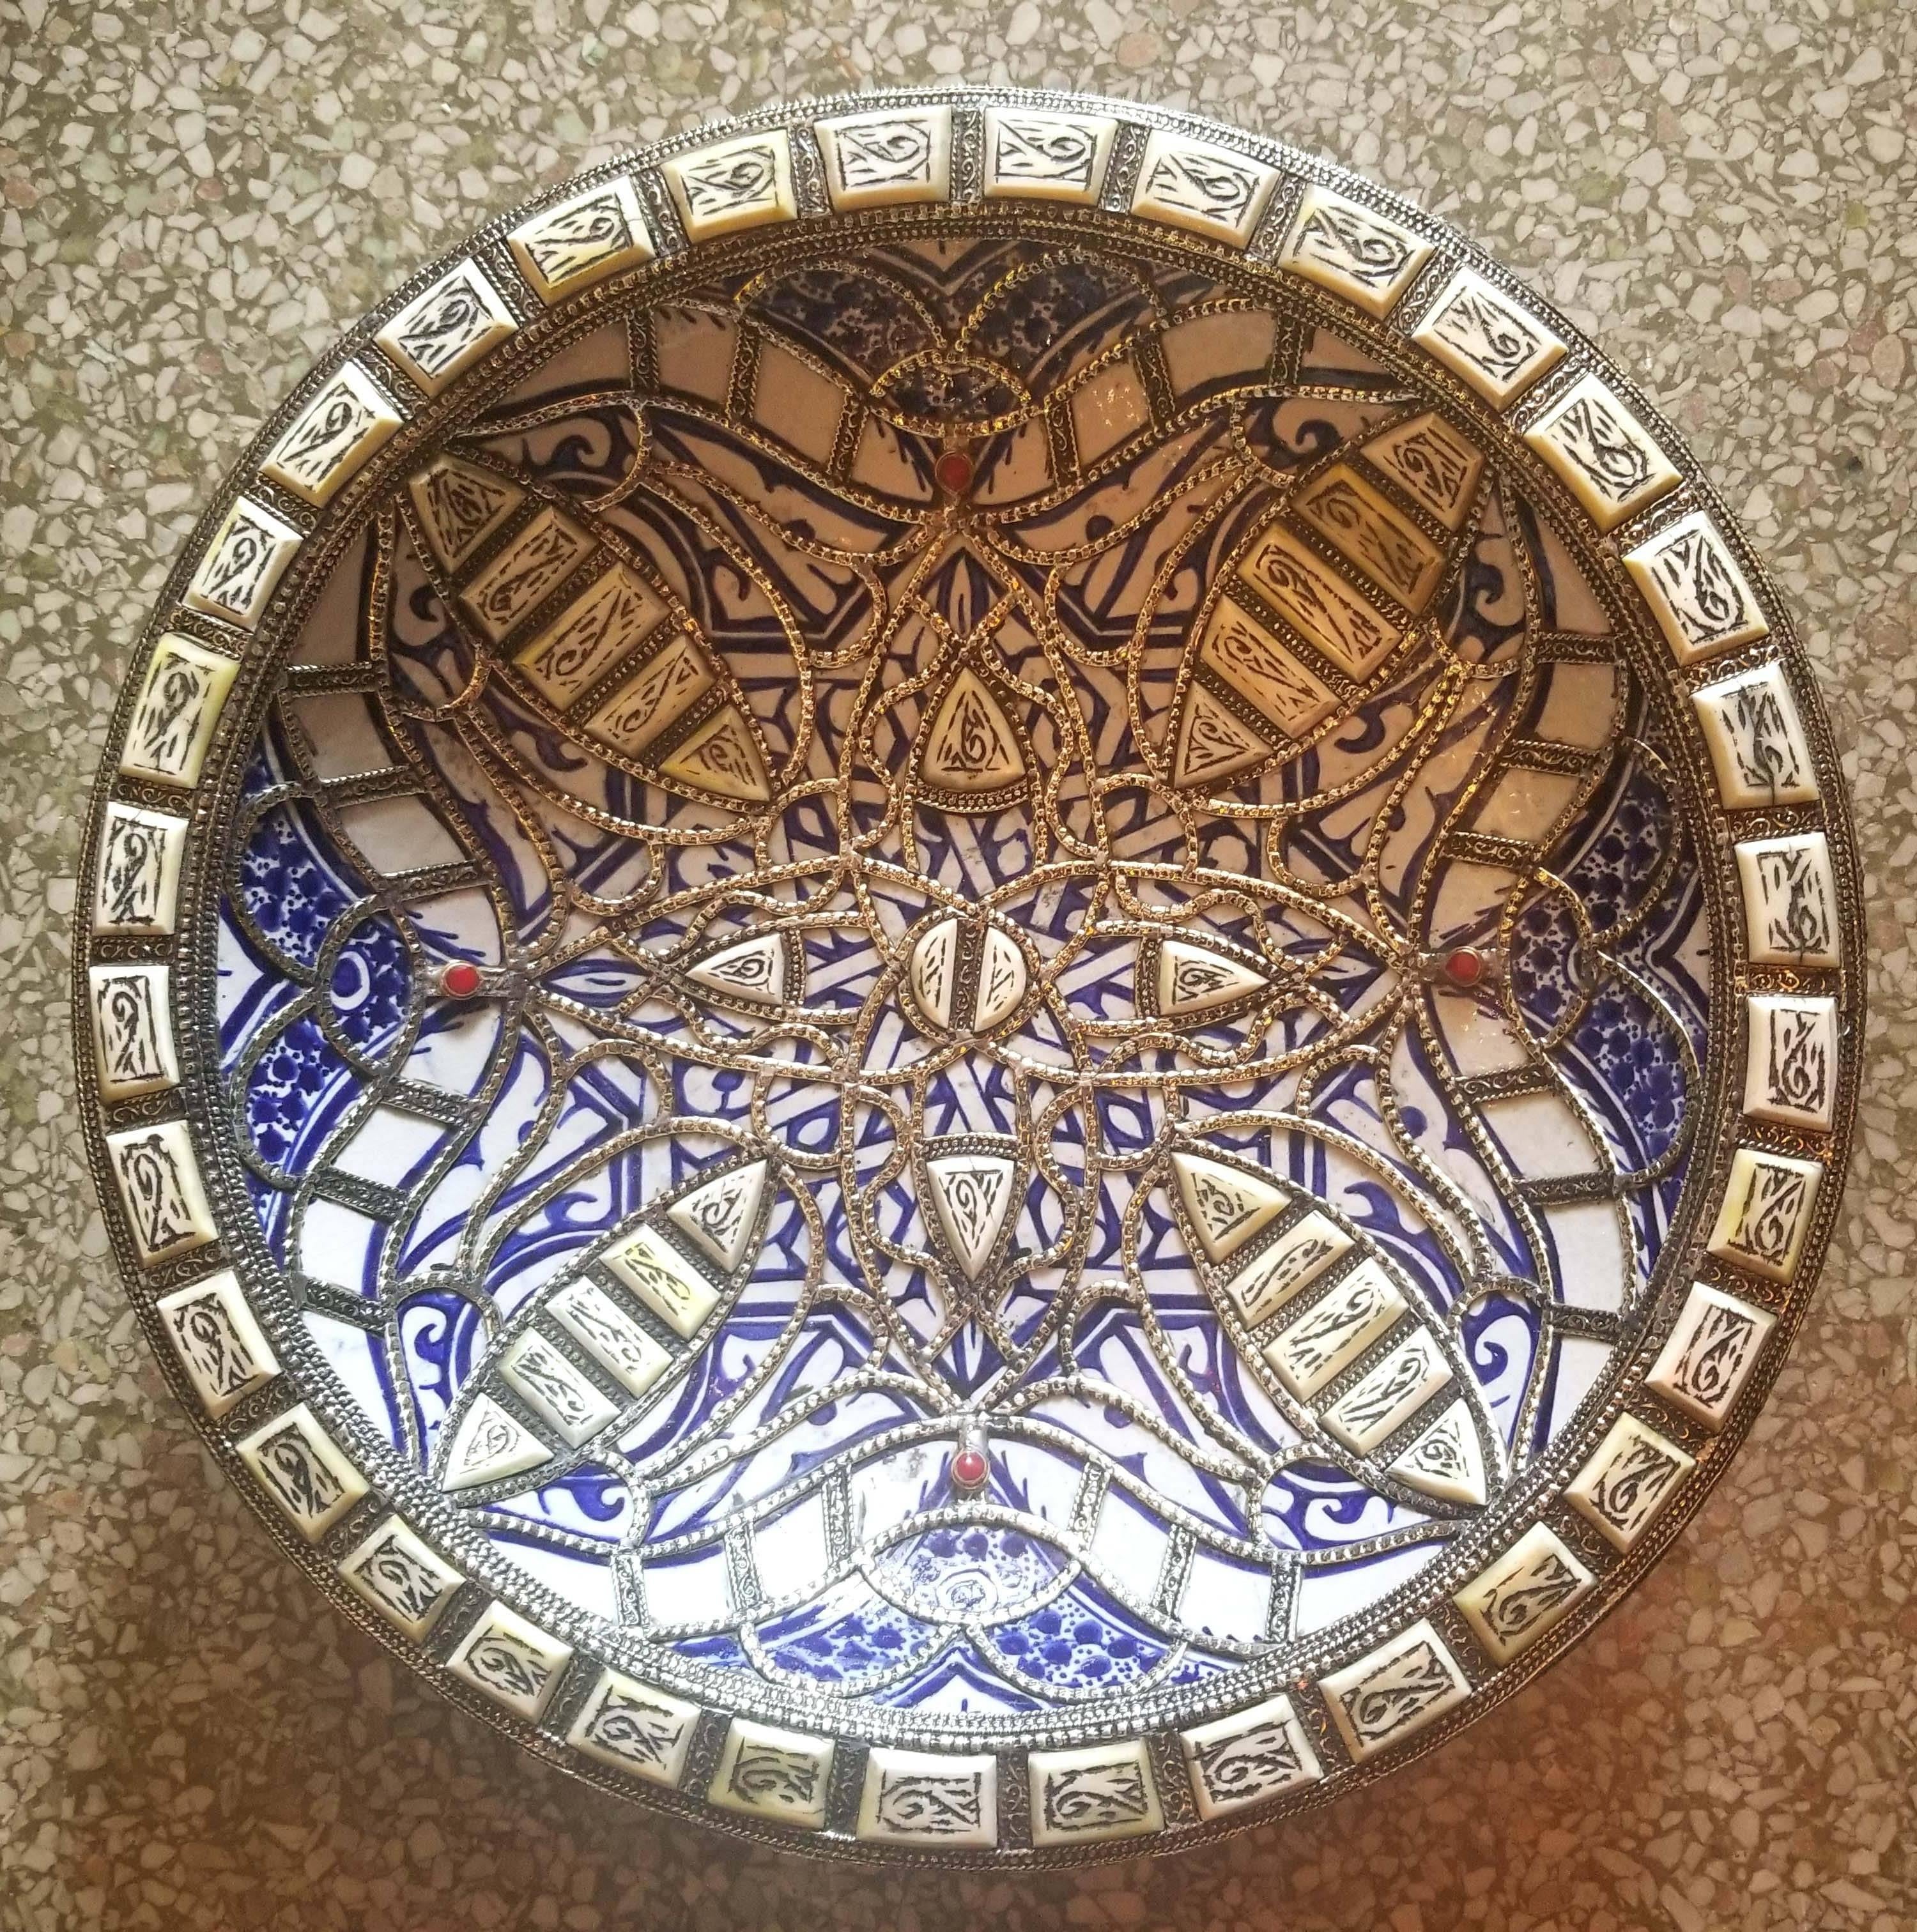 Metal and Camel Bone Inlaid Moroccan Hand-Painted Plate, Blue or White In Excellent Condition For Sale In Orlando, FL